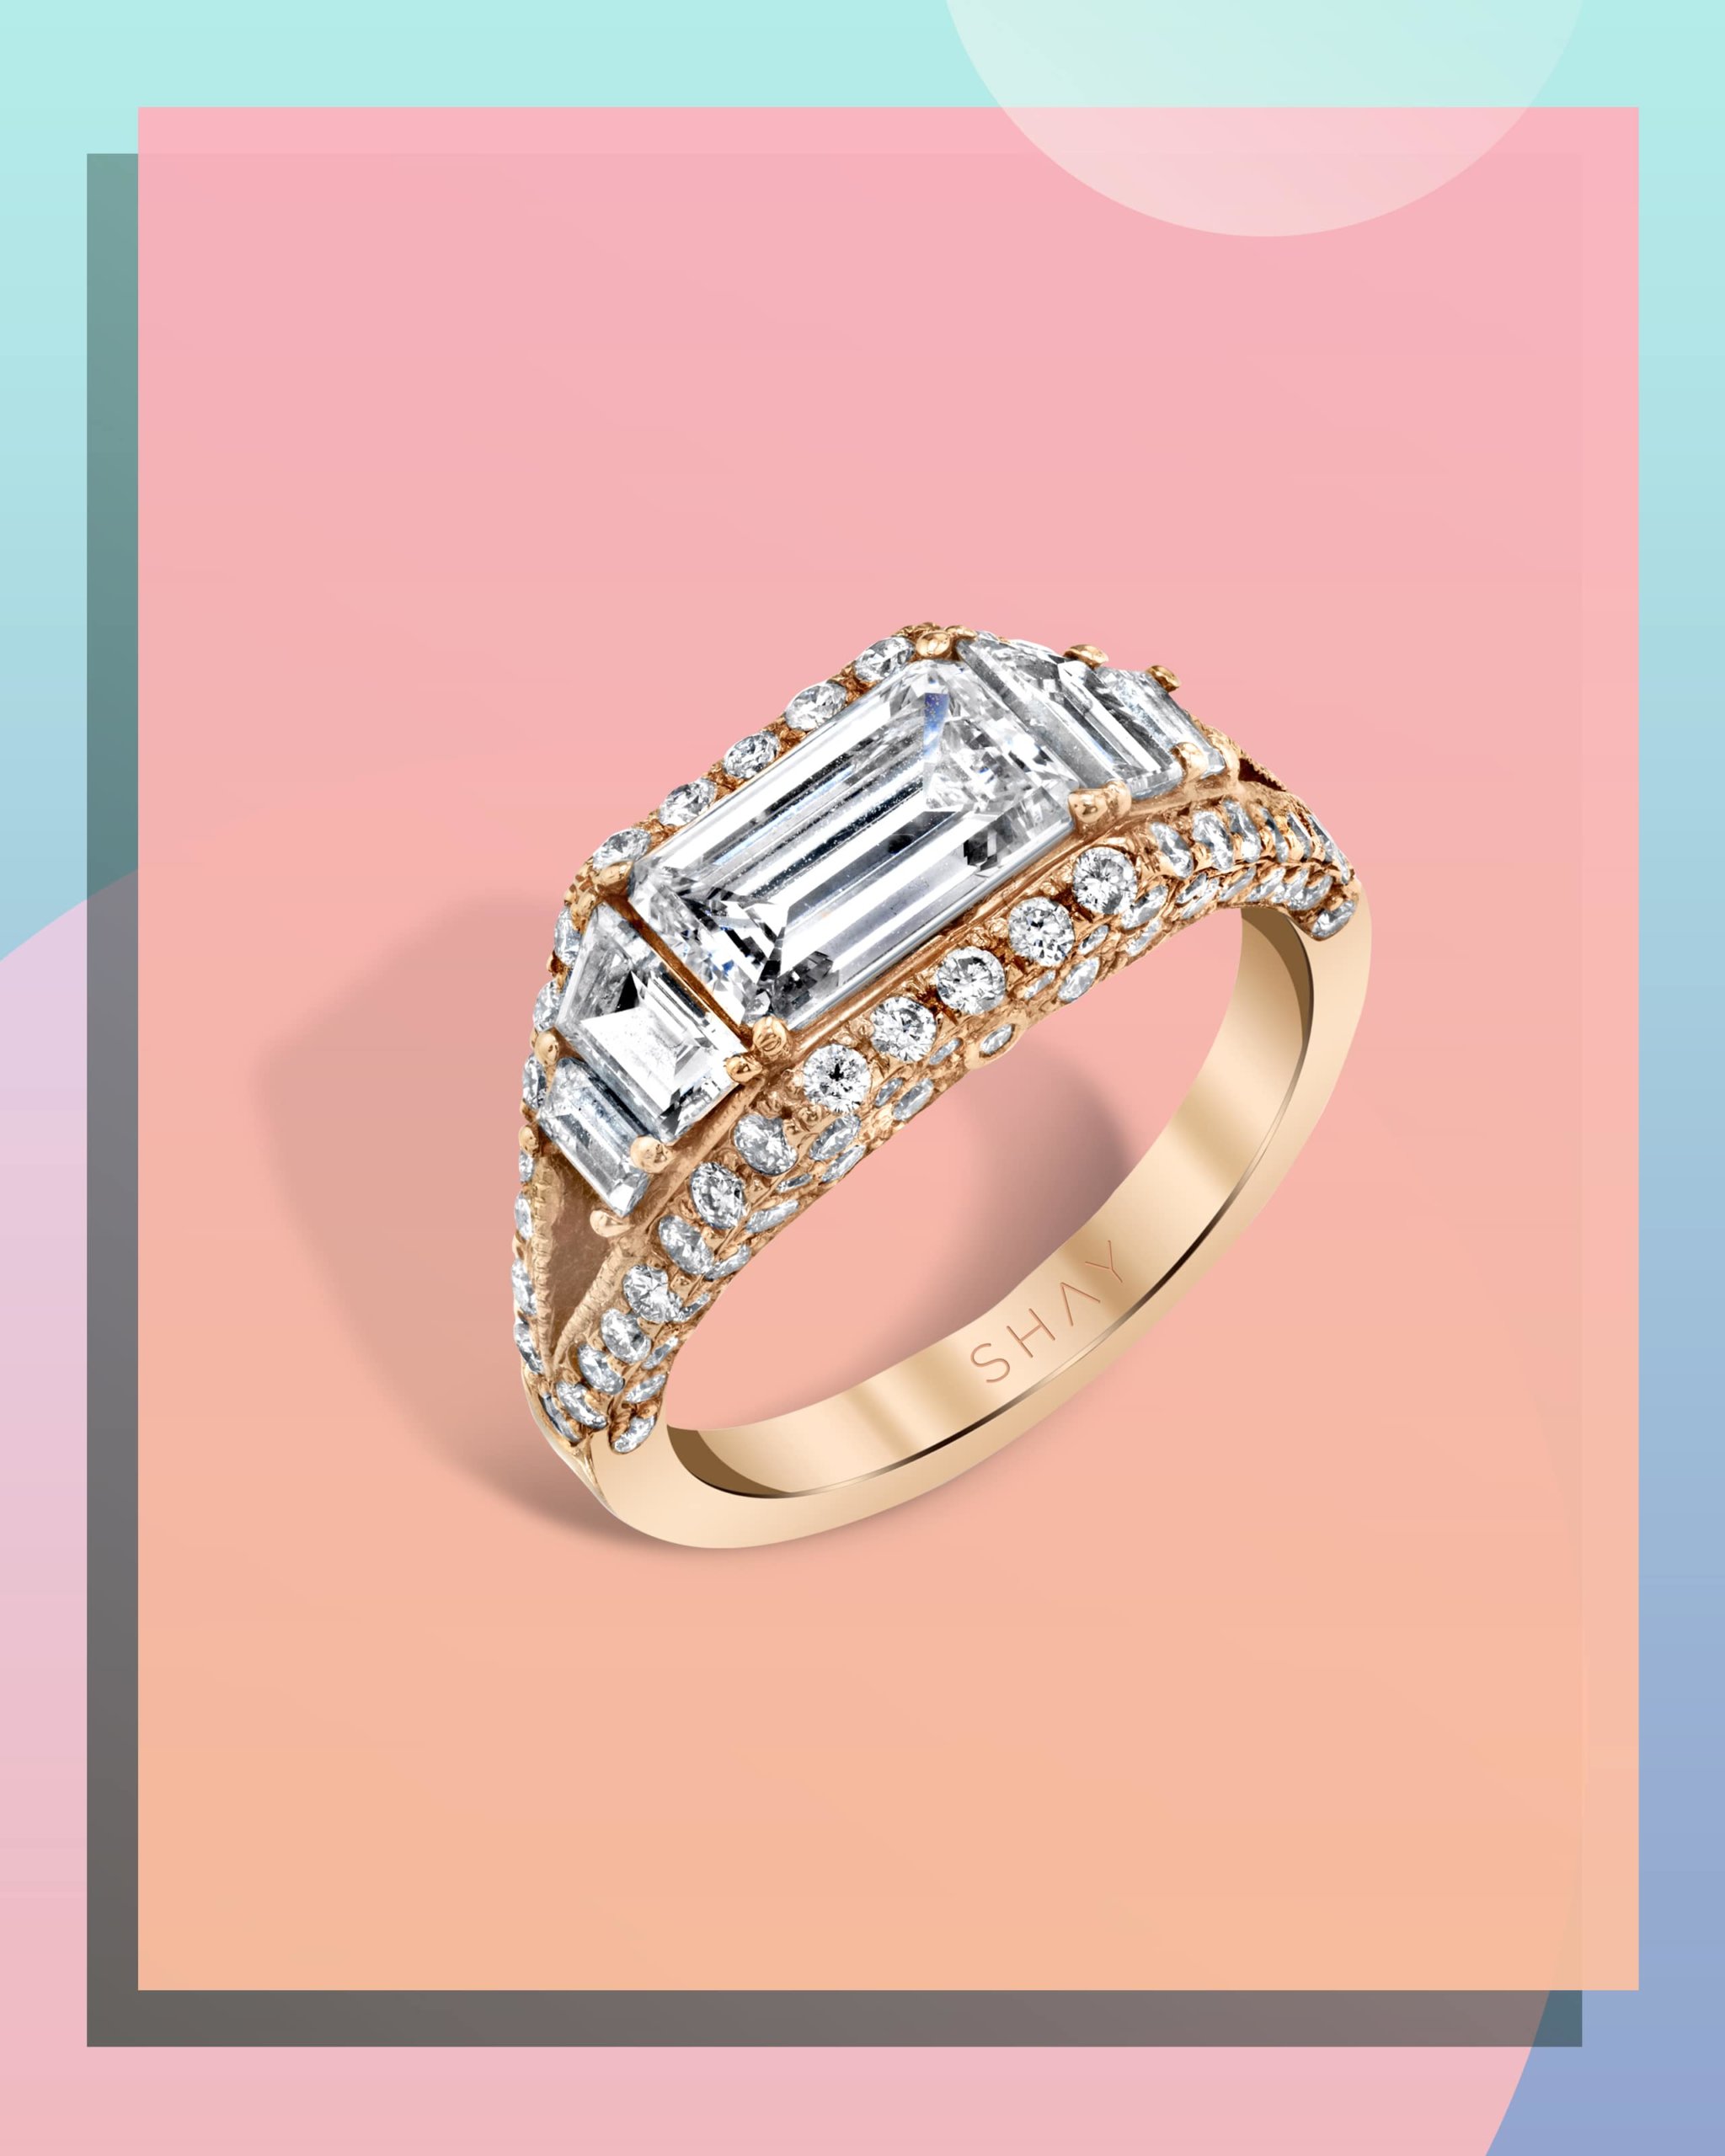 Emerald cut diamond hugged by white diamonds set within an east west engagement ring on a yellow gold band from Shay Jewelry